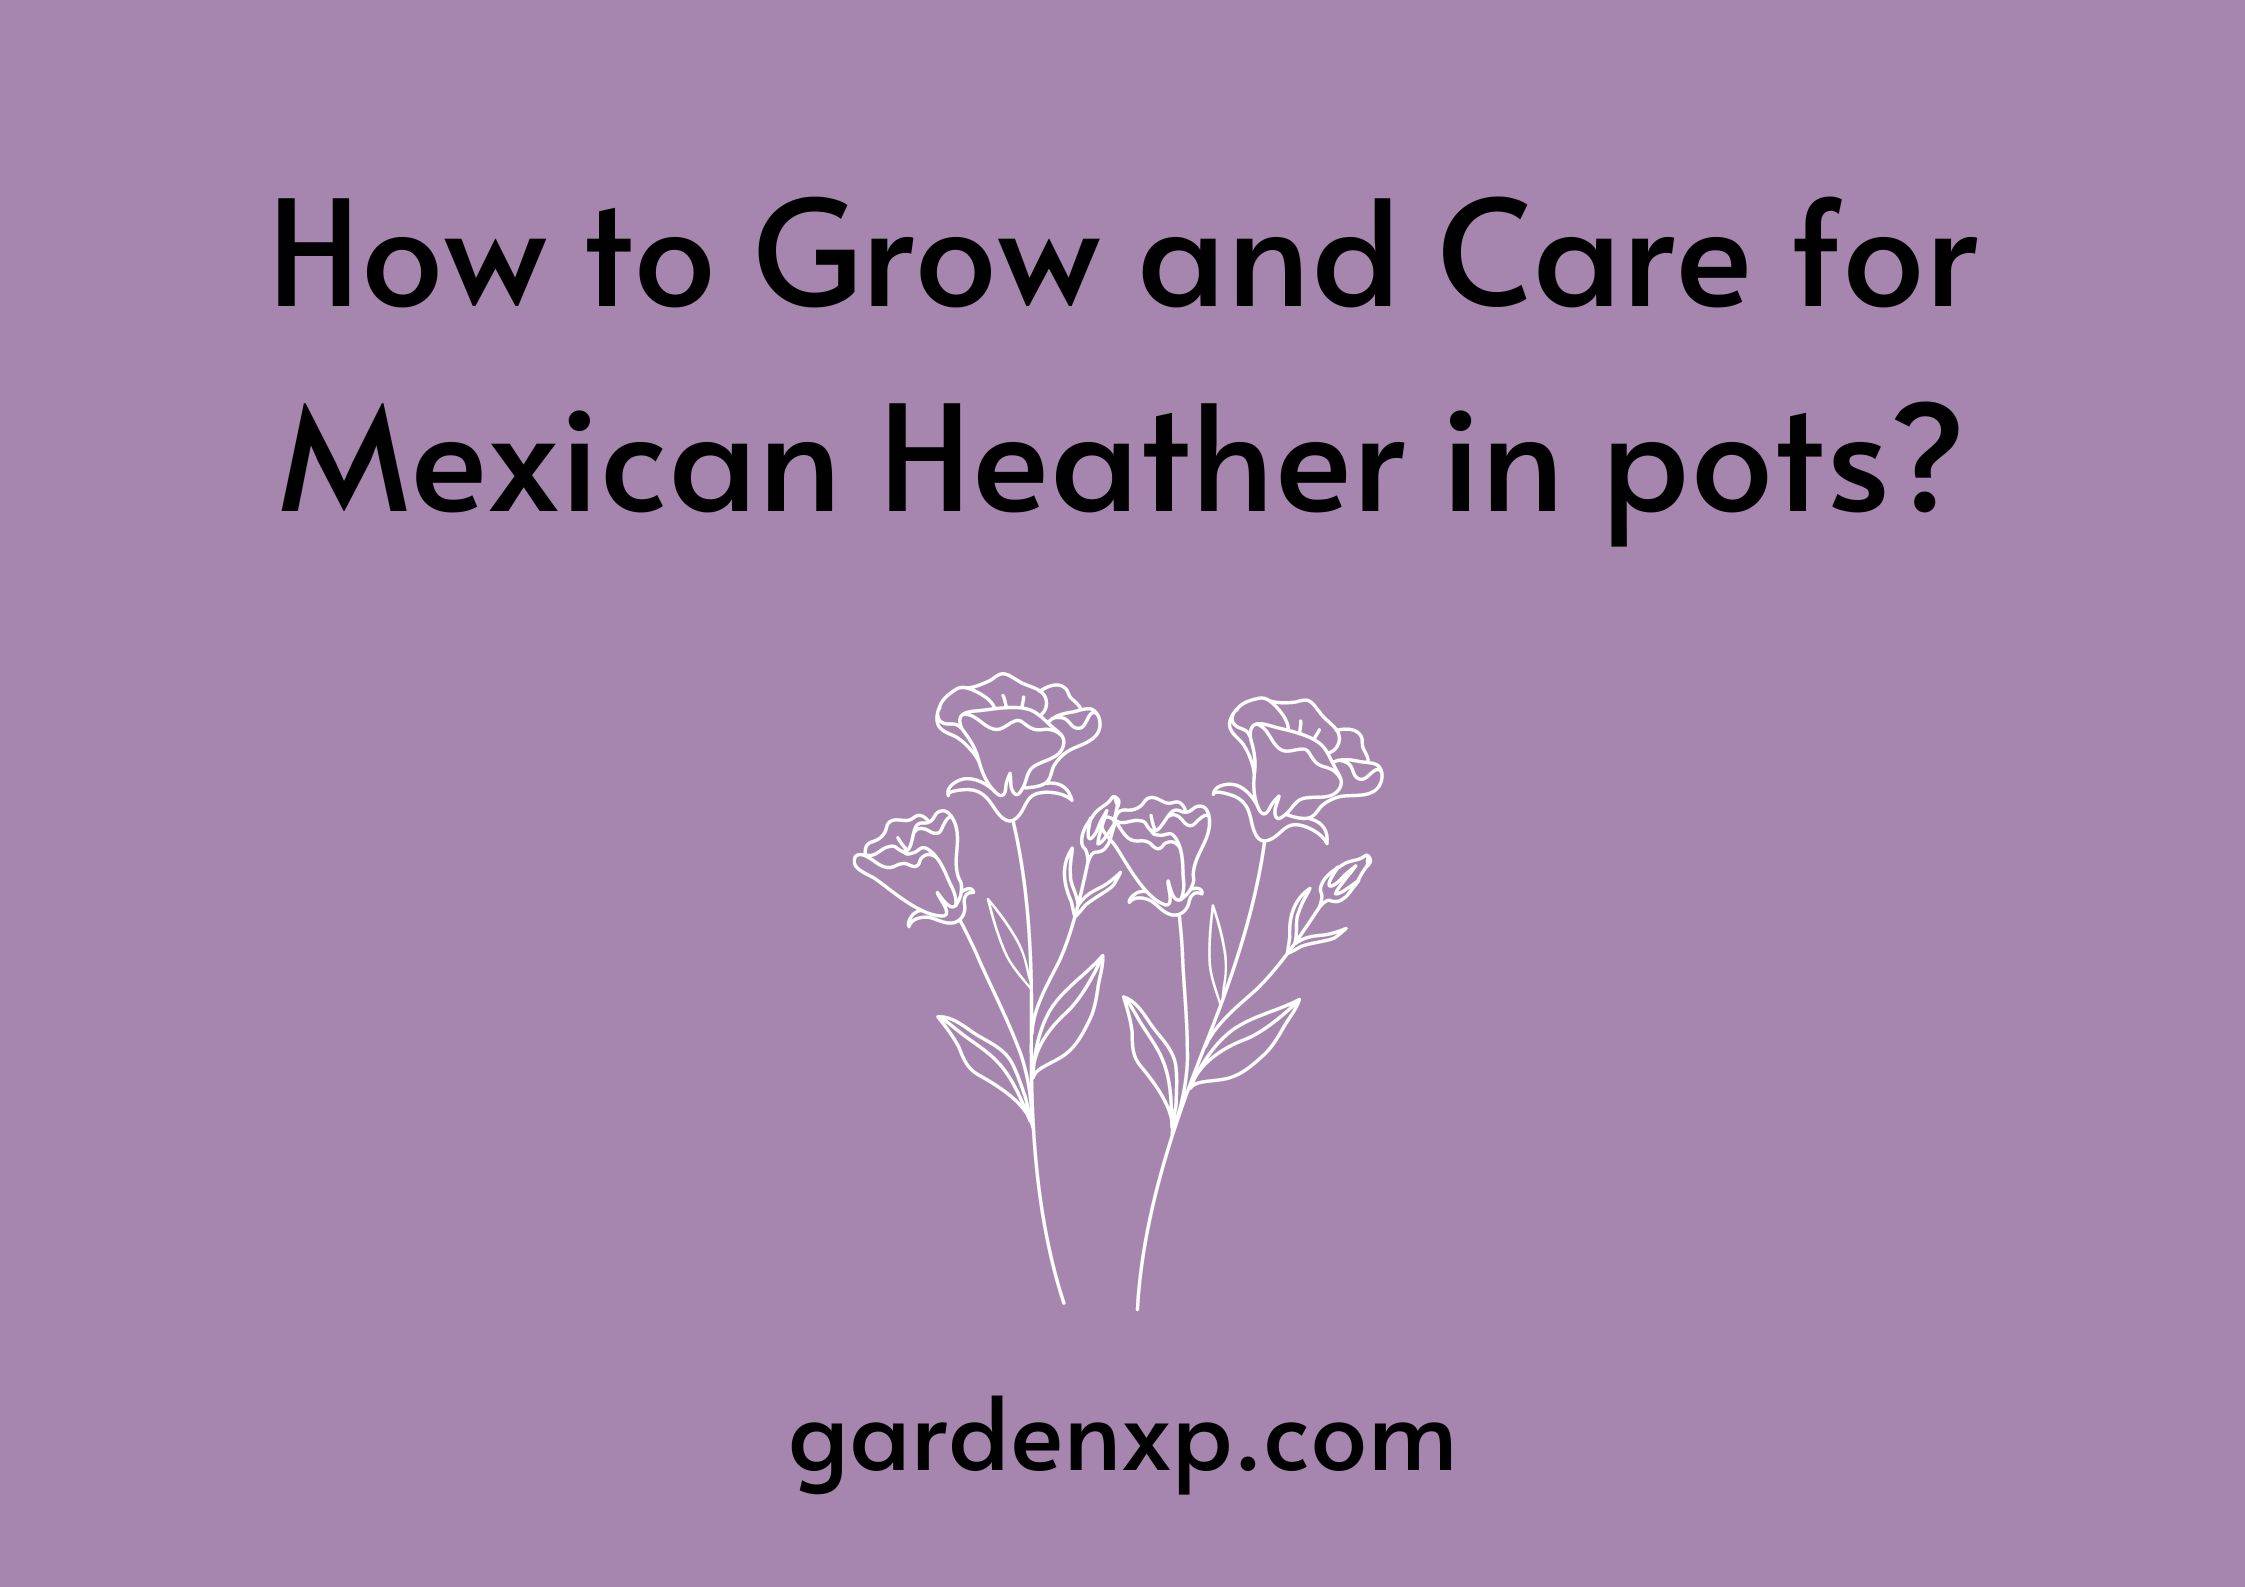 How to Grow and Care for Mexican Heather in pots?